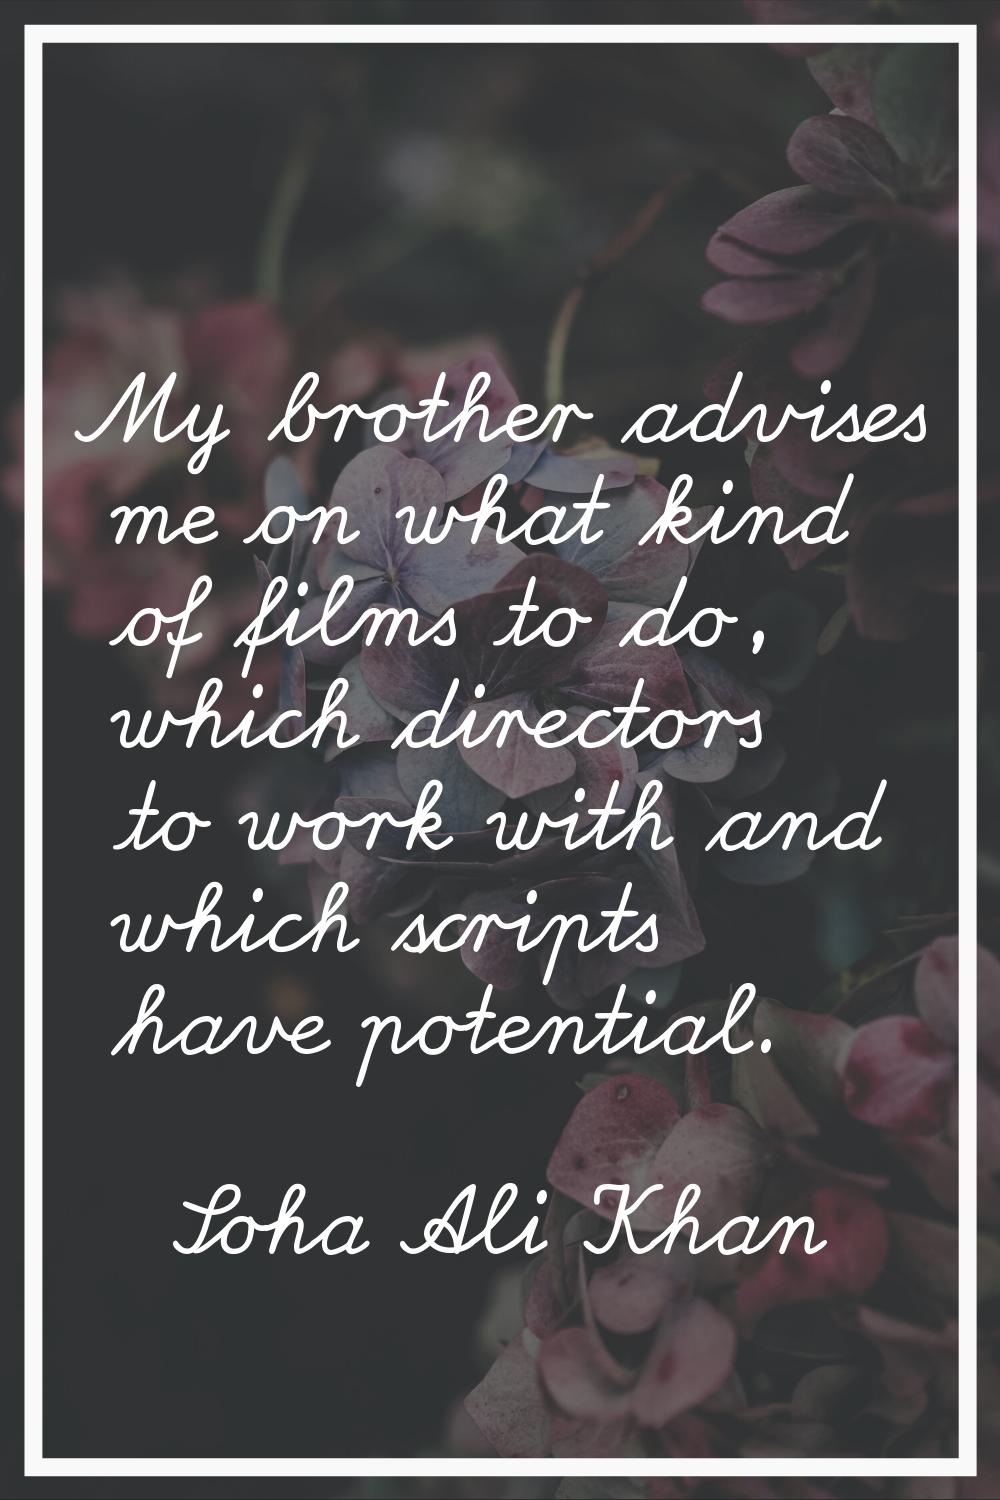 My brother advises me on what kind of films to do, which directors to work with and which scripts h